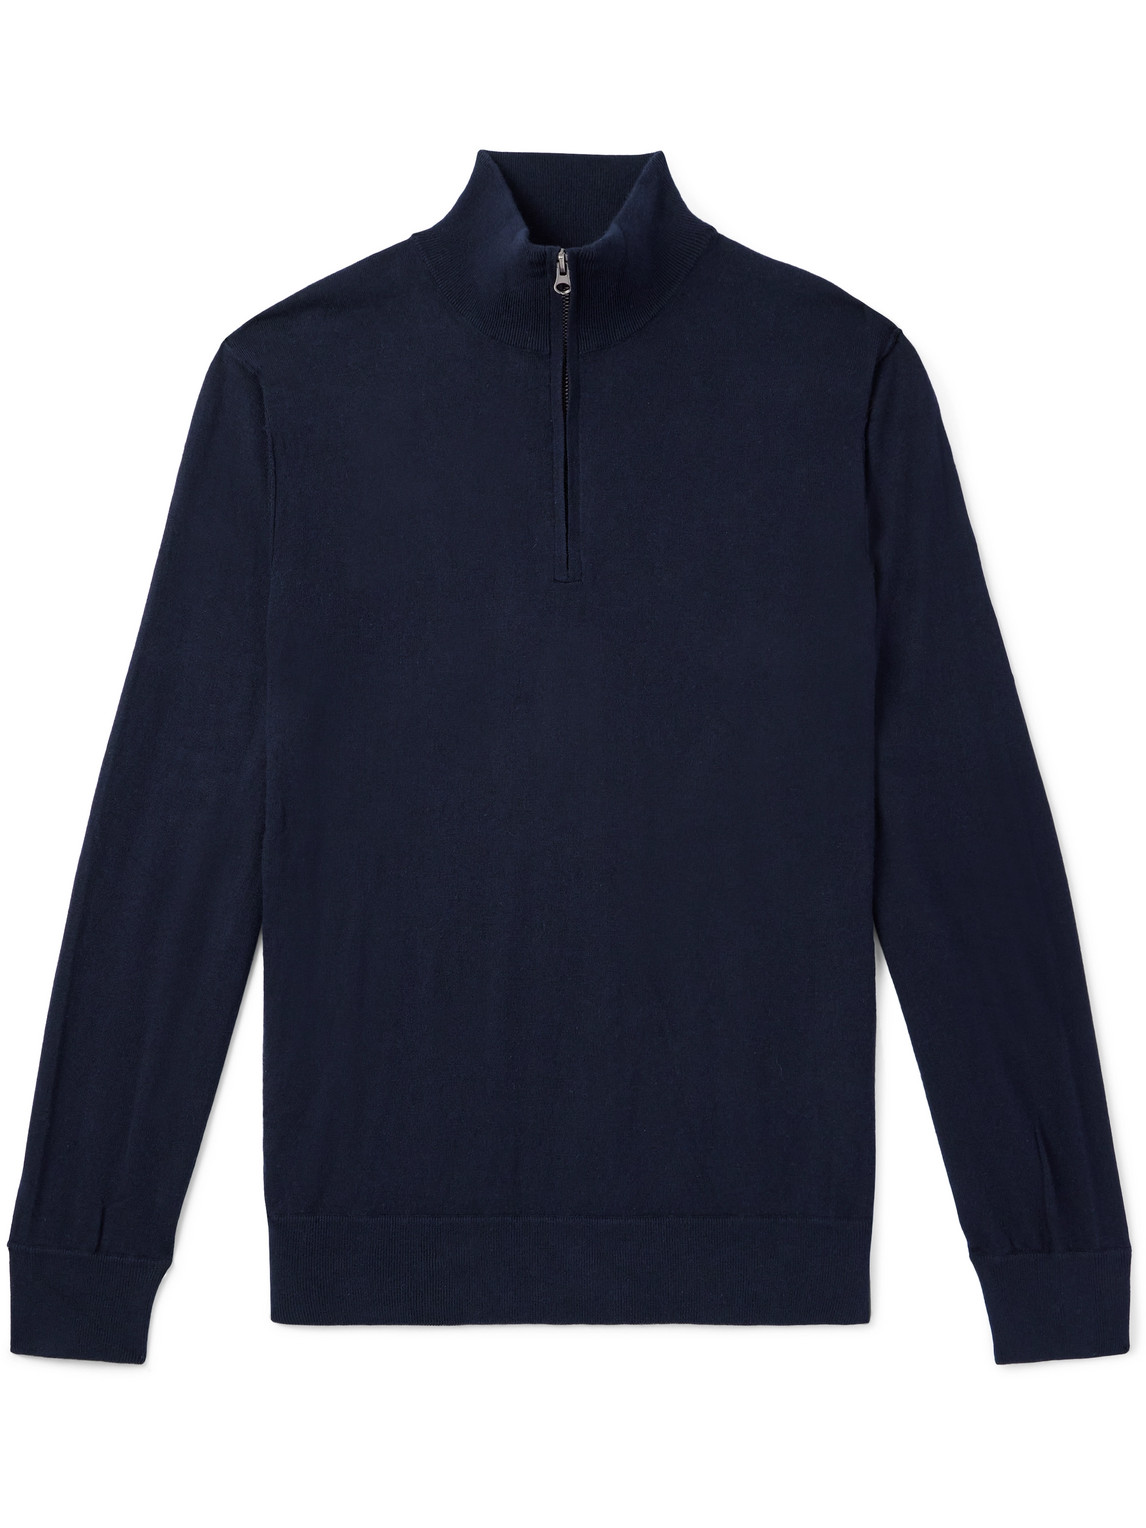 Cotton and Wool-Blend Half-Zip Sweater